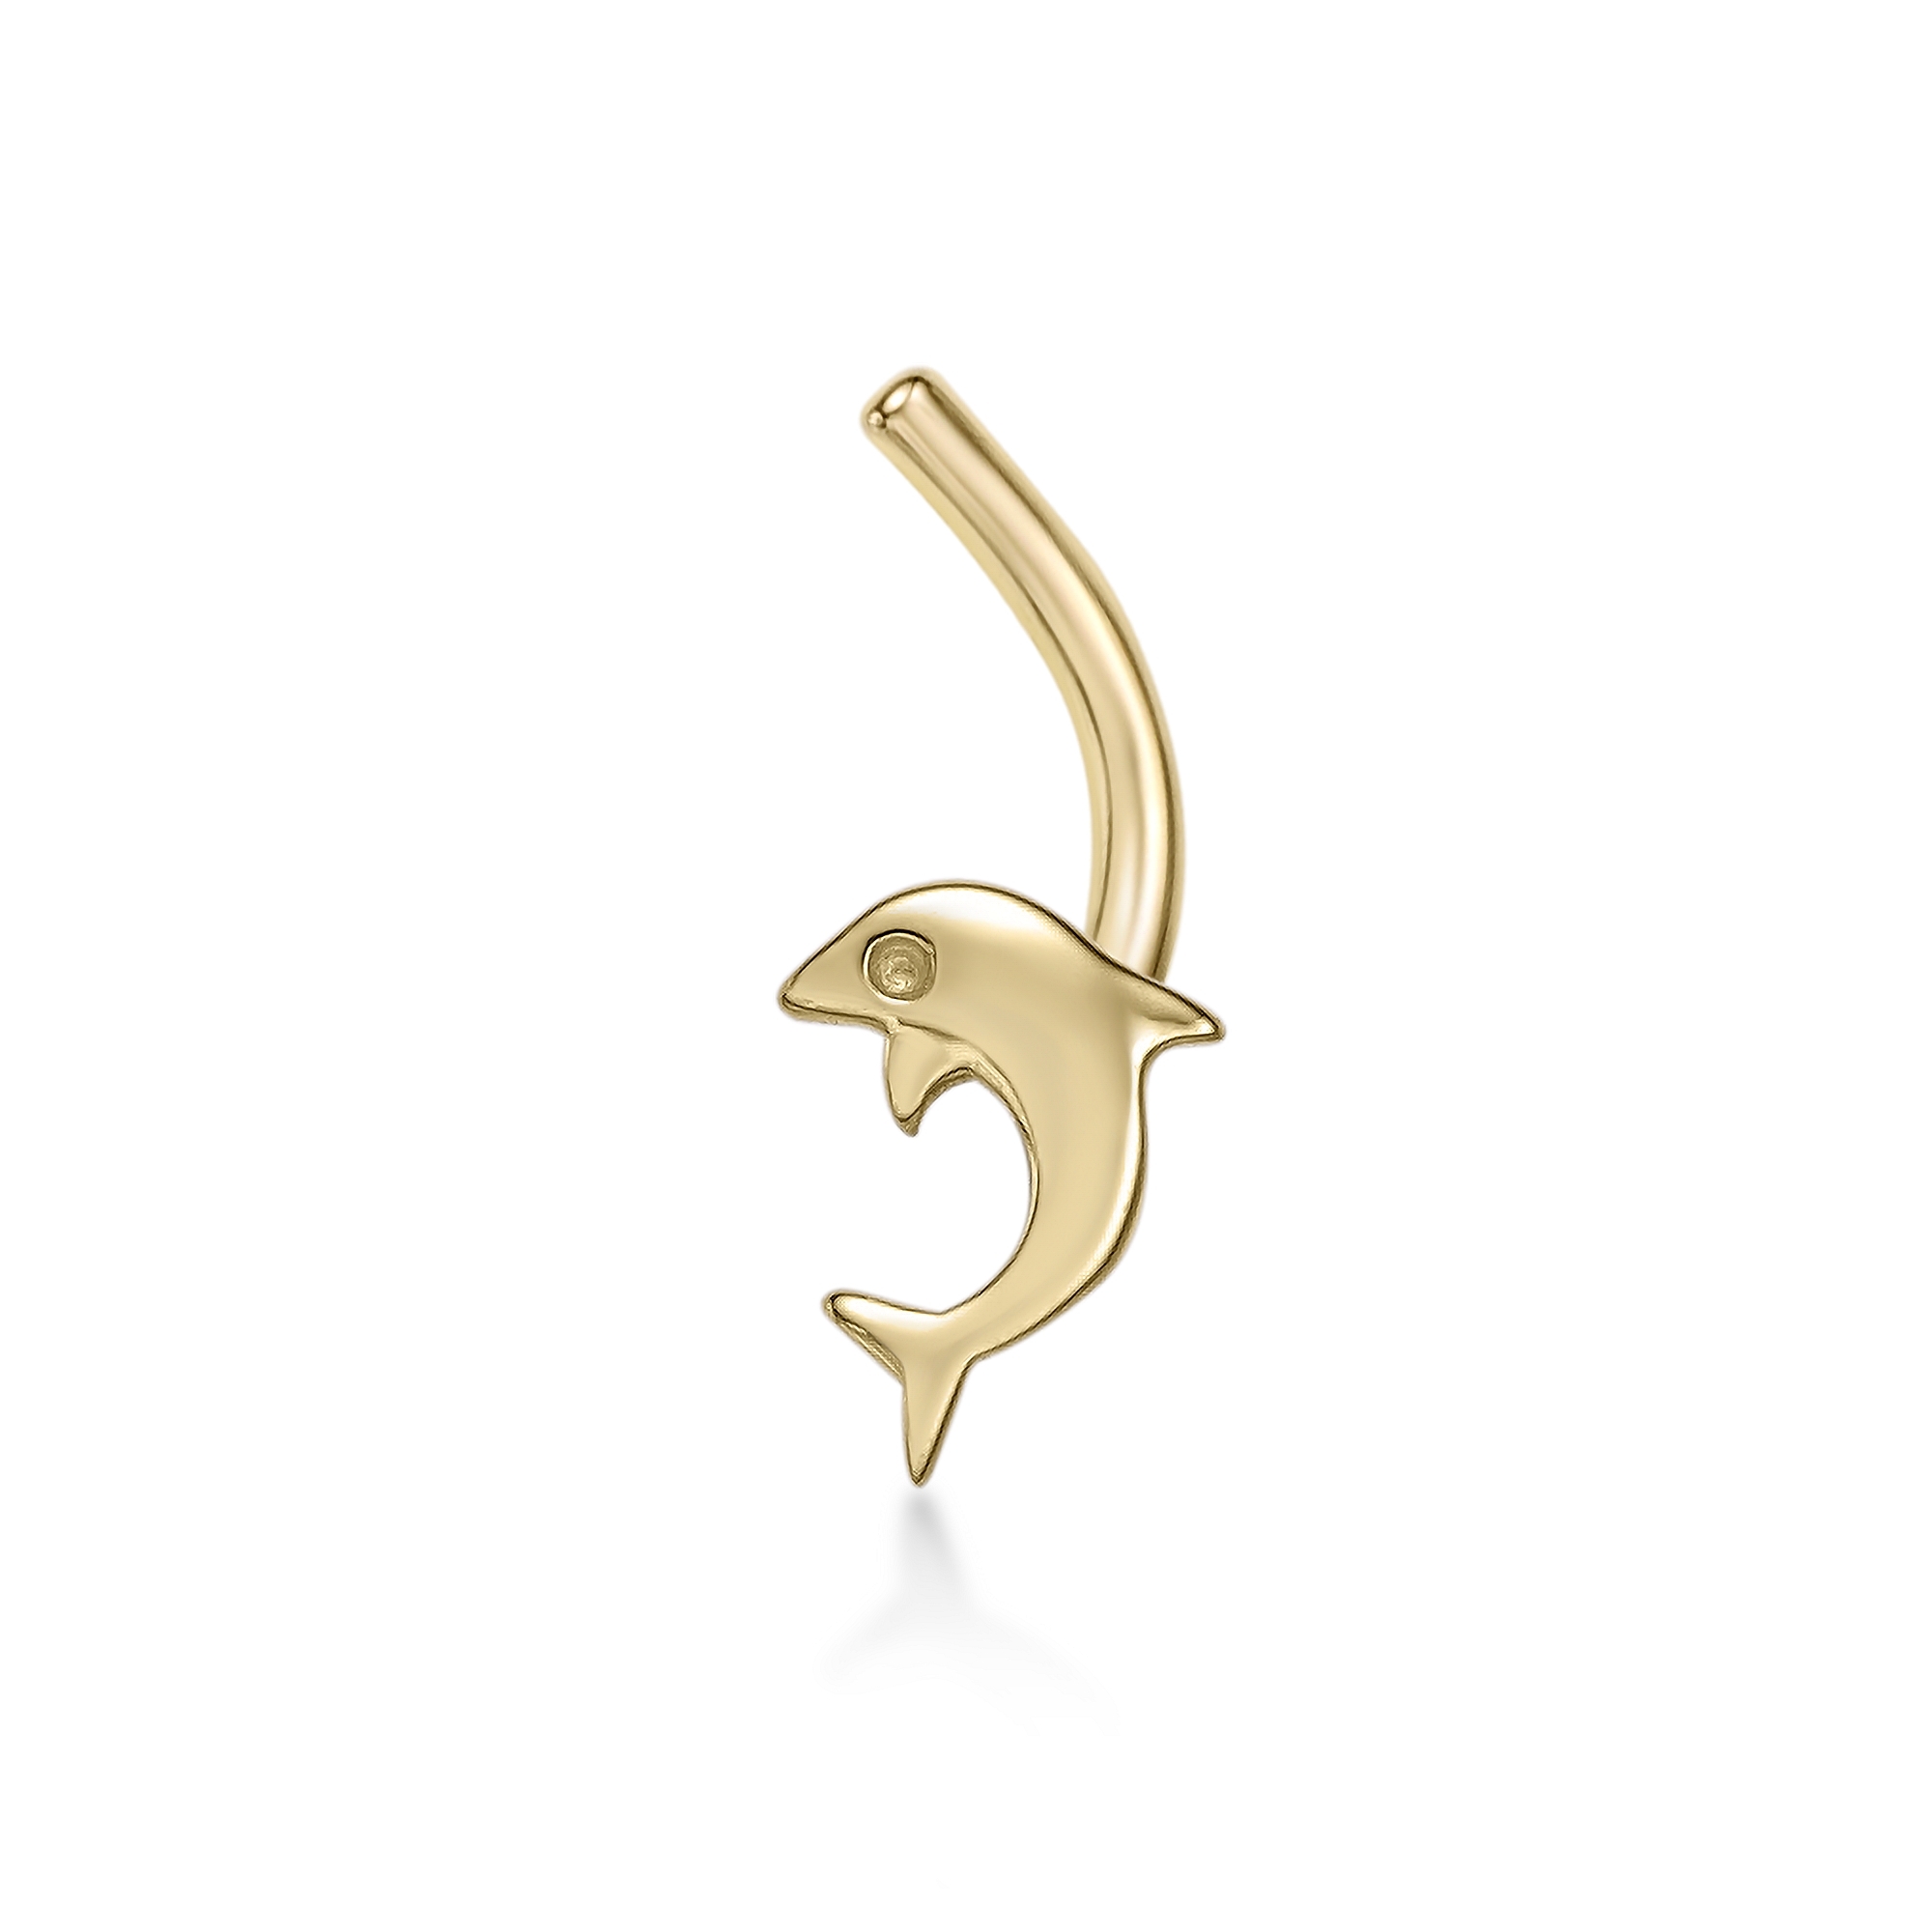 Lavari Jewelers Women's 5 MM Dolphin Curved Nose Ring, 14K Yellow Gold, 20 Gauge